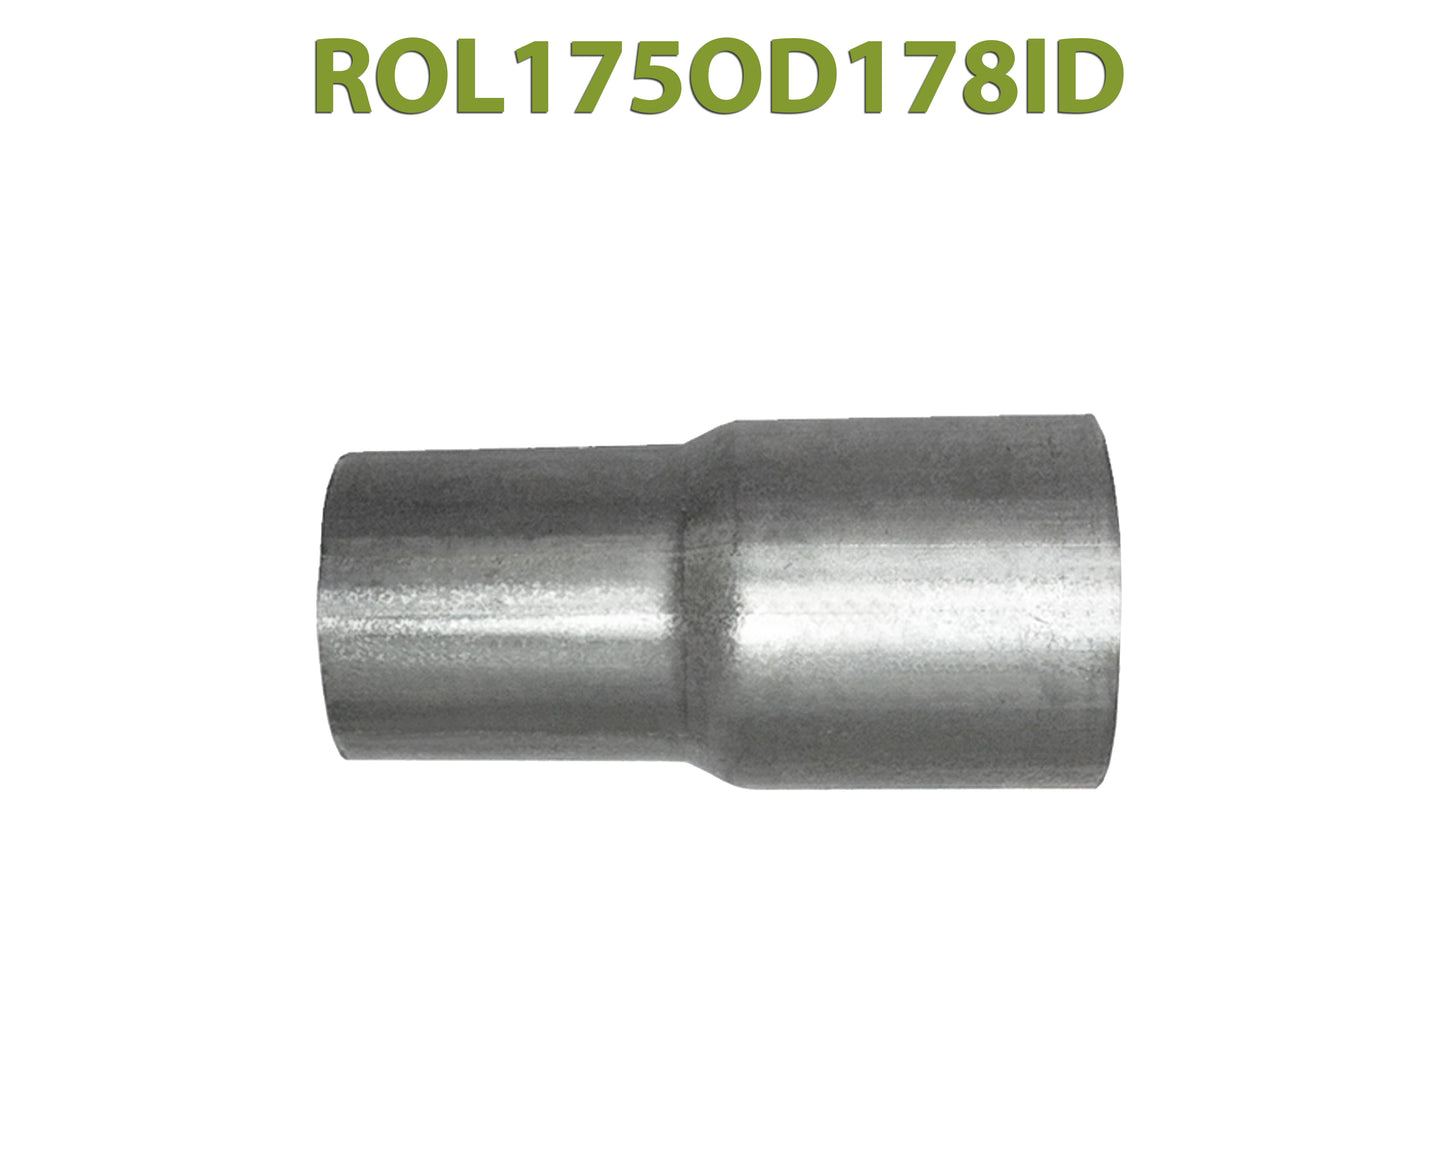 ROL175OD178ID 548526 1 3/4” OD to 1 7/8” ID Universal Exhaust Component to Pipe Adapter Reducer